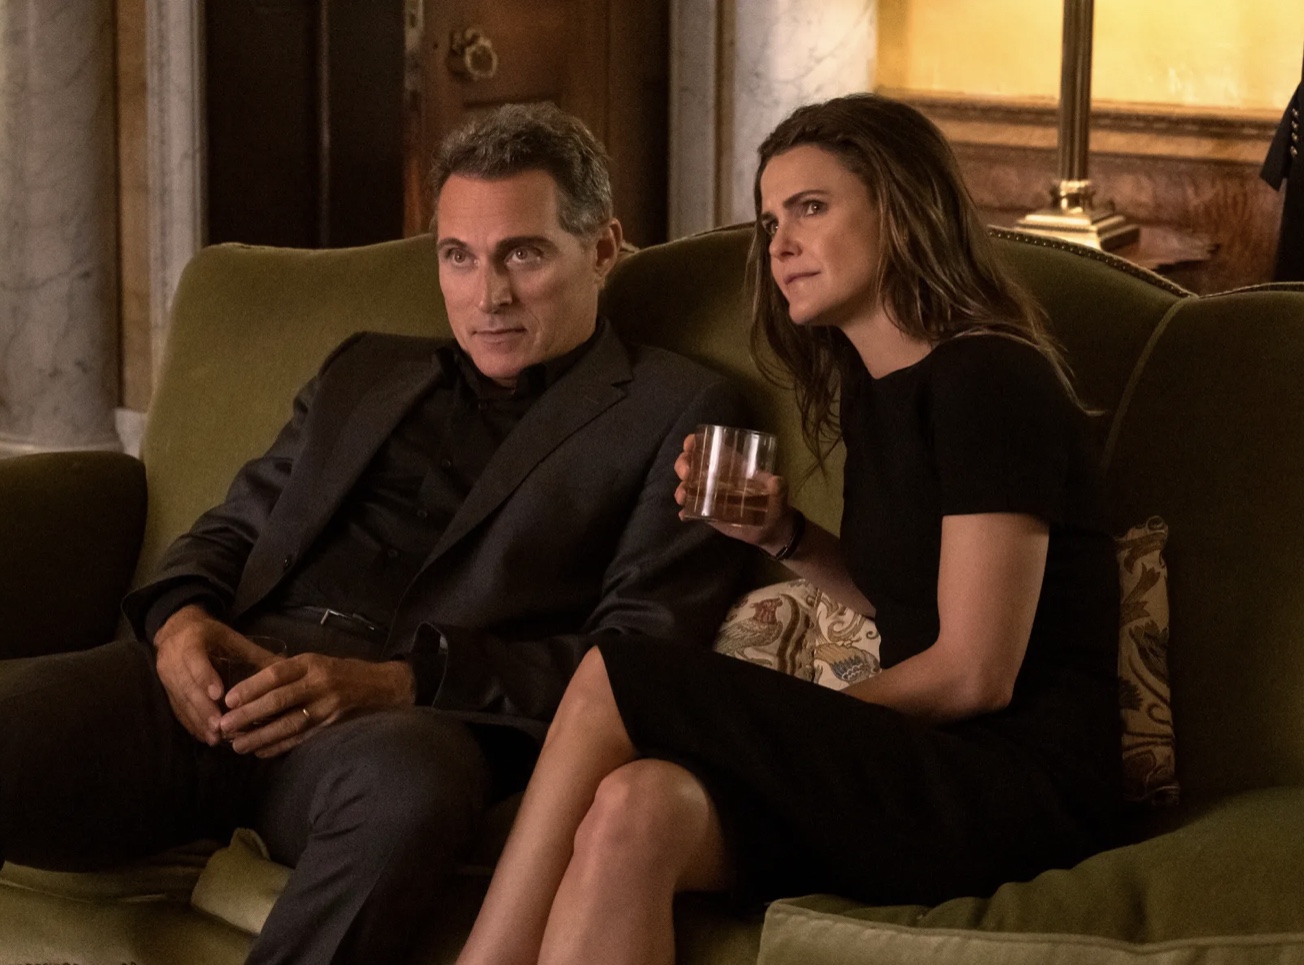 Keri Russell and Rufus Sewell in "The Diplomat"